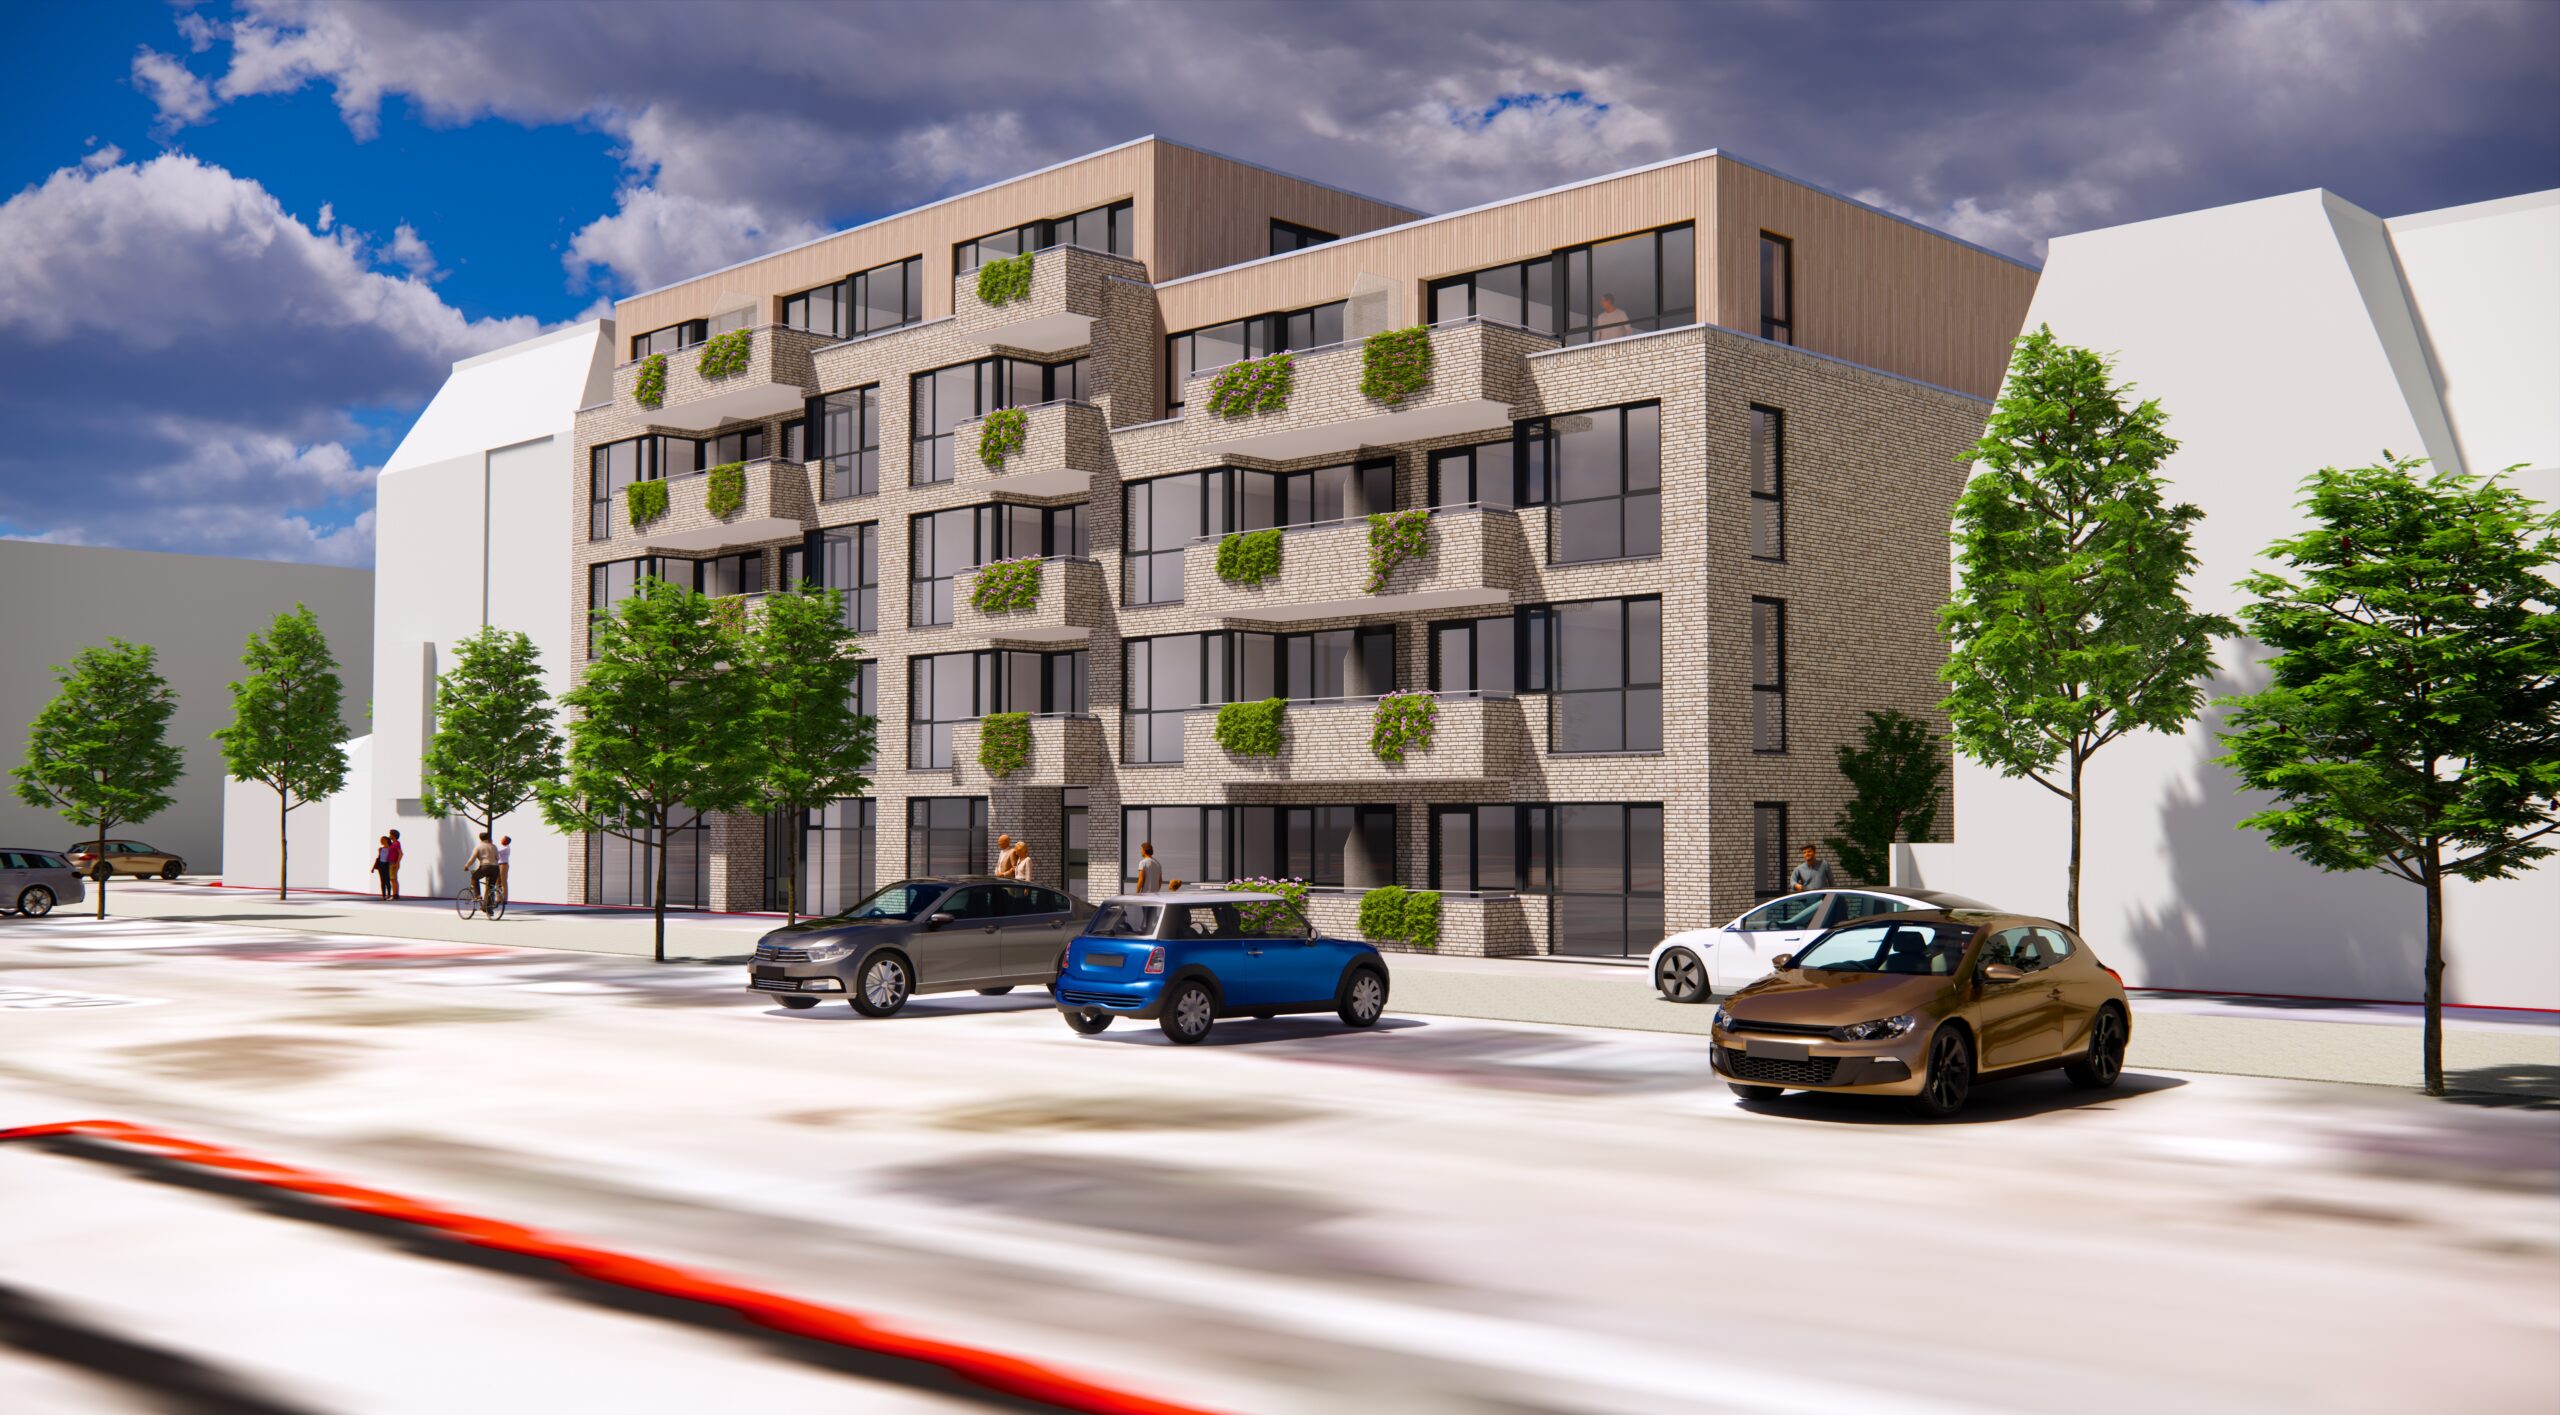 3D Witherenstraat 7 Blerick - Lebe Group